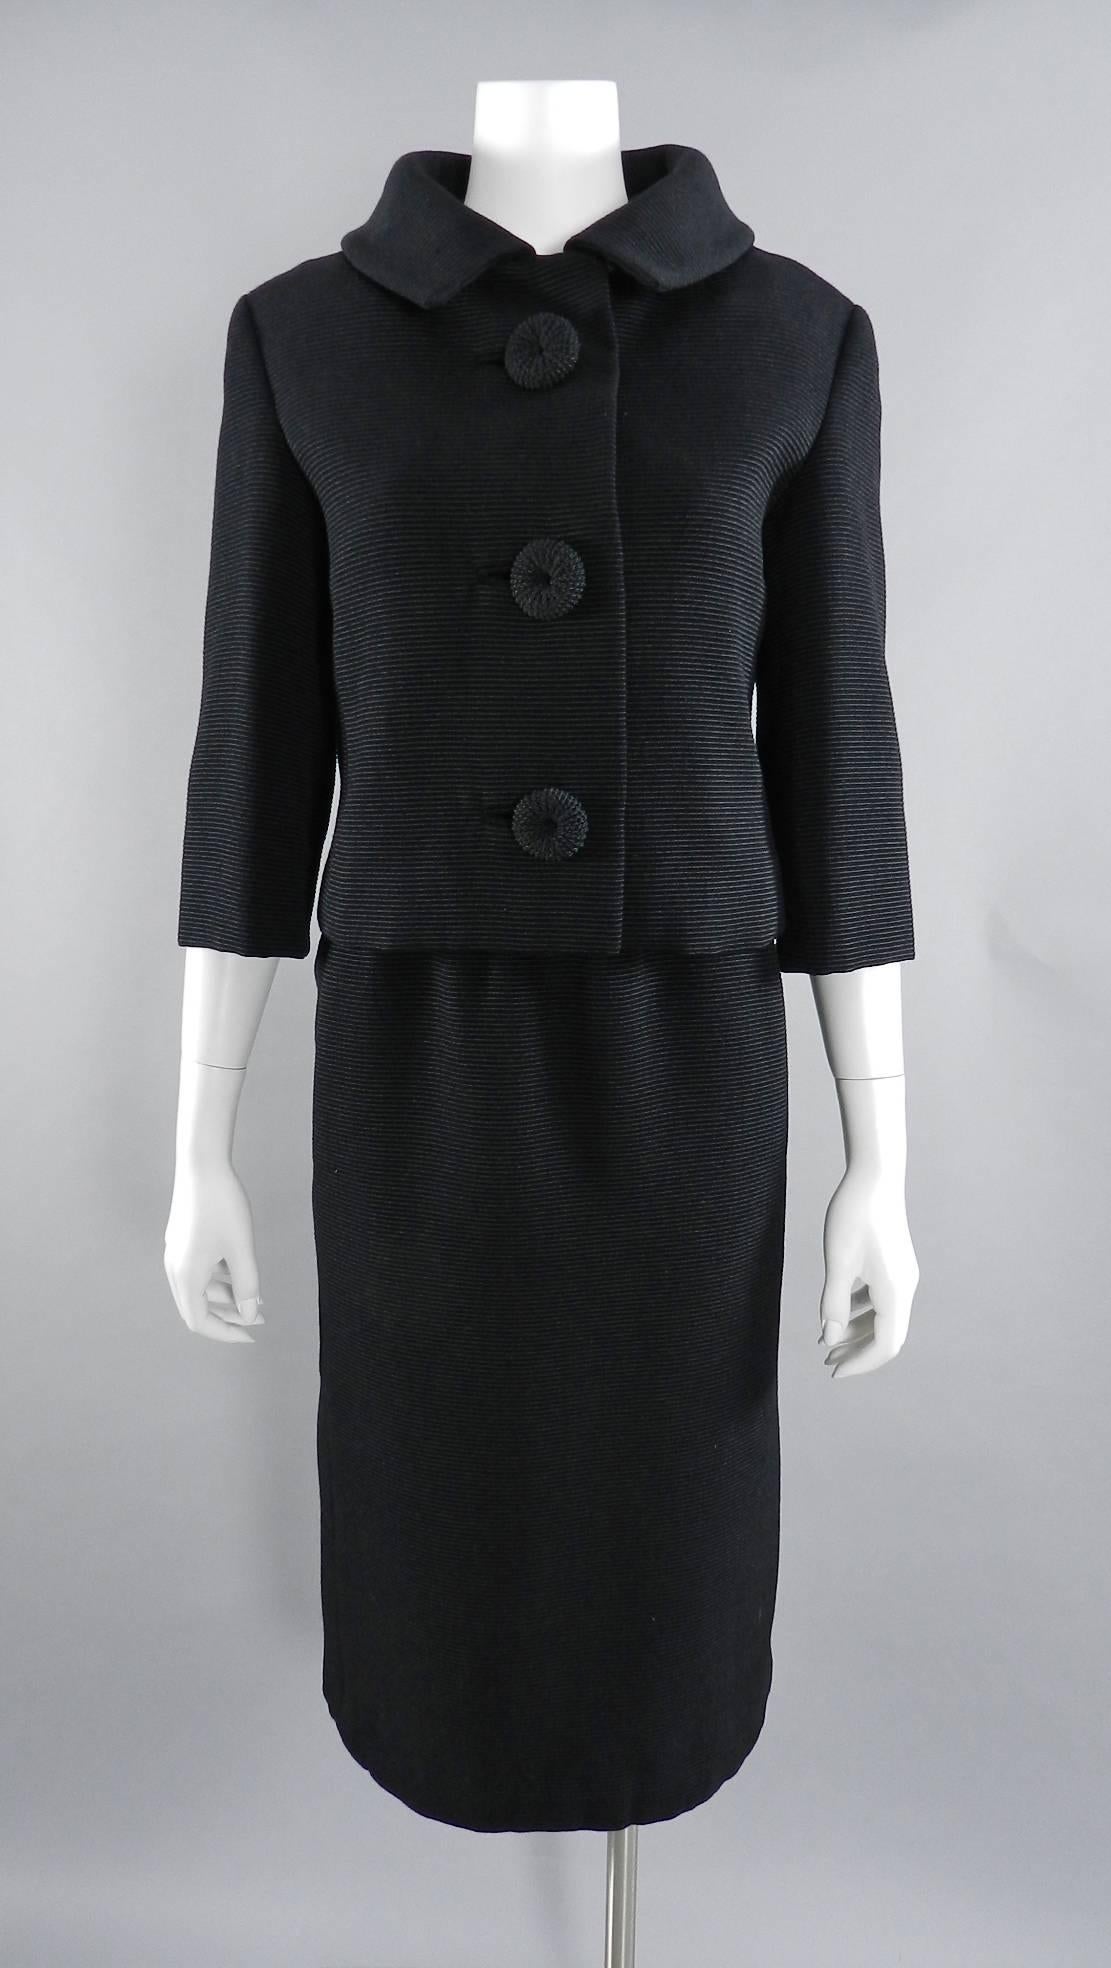 Christian Dior circa 1960 black dress and jacket suit. Dior London Made in England label. Fine textured ribbed fabric with large statement buttons. Satin lined interior.  Dress measures 36" at bust (recommended for 35" bust person),